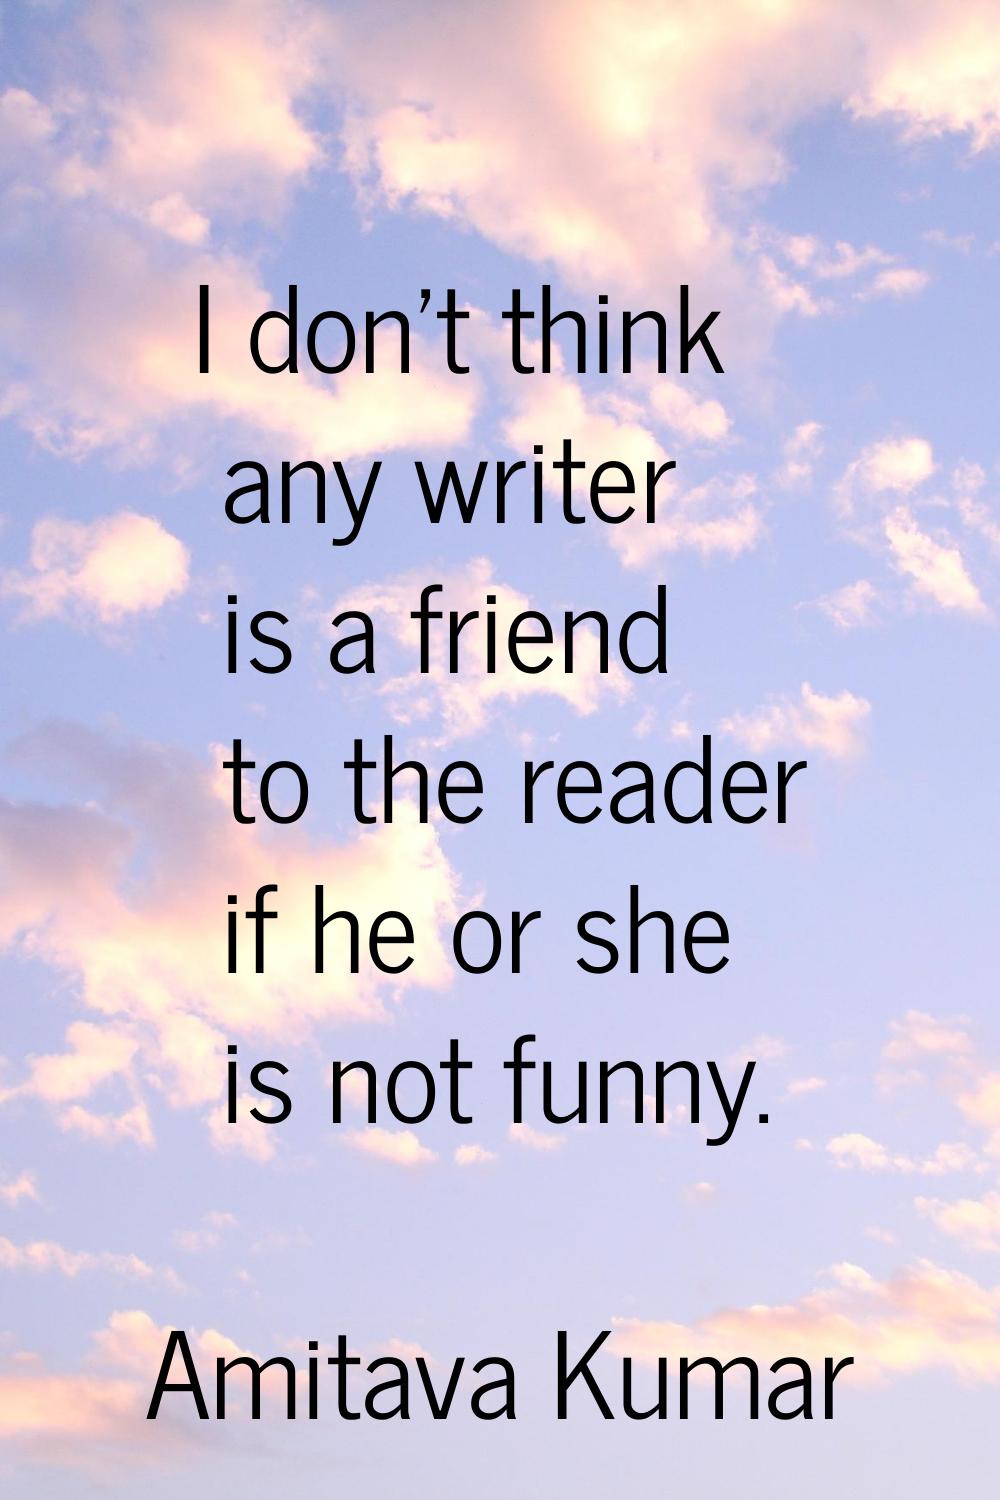 I don't think any writer is a friend to the reader if he or she is not funny.